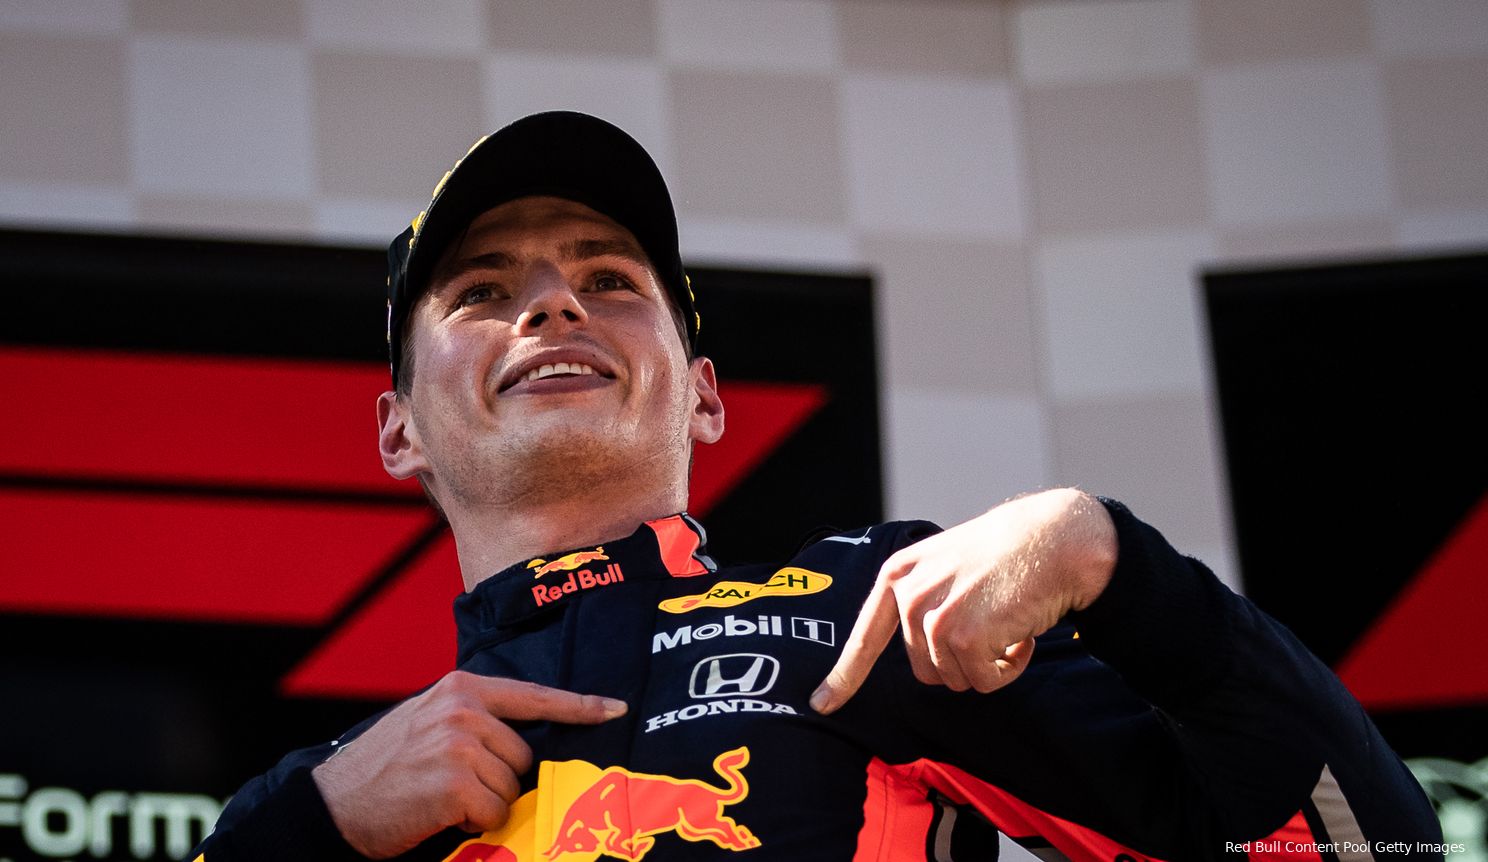 Max Verstappen shows pride in Honda after beating Austria in 2019